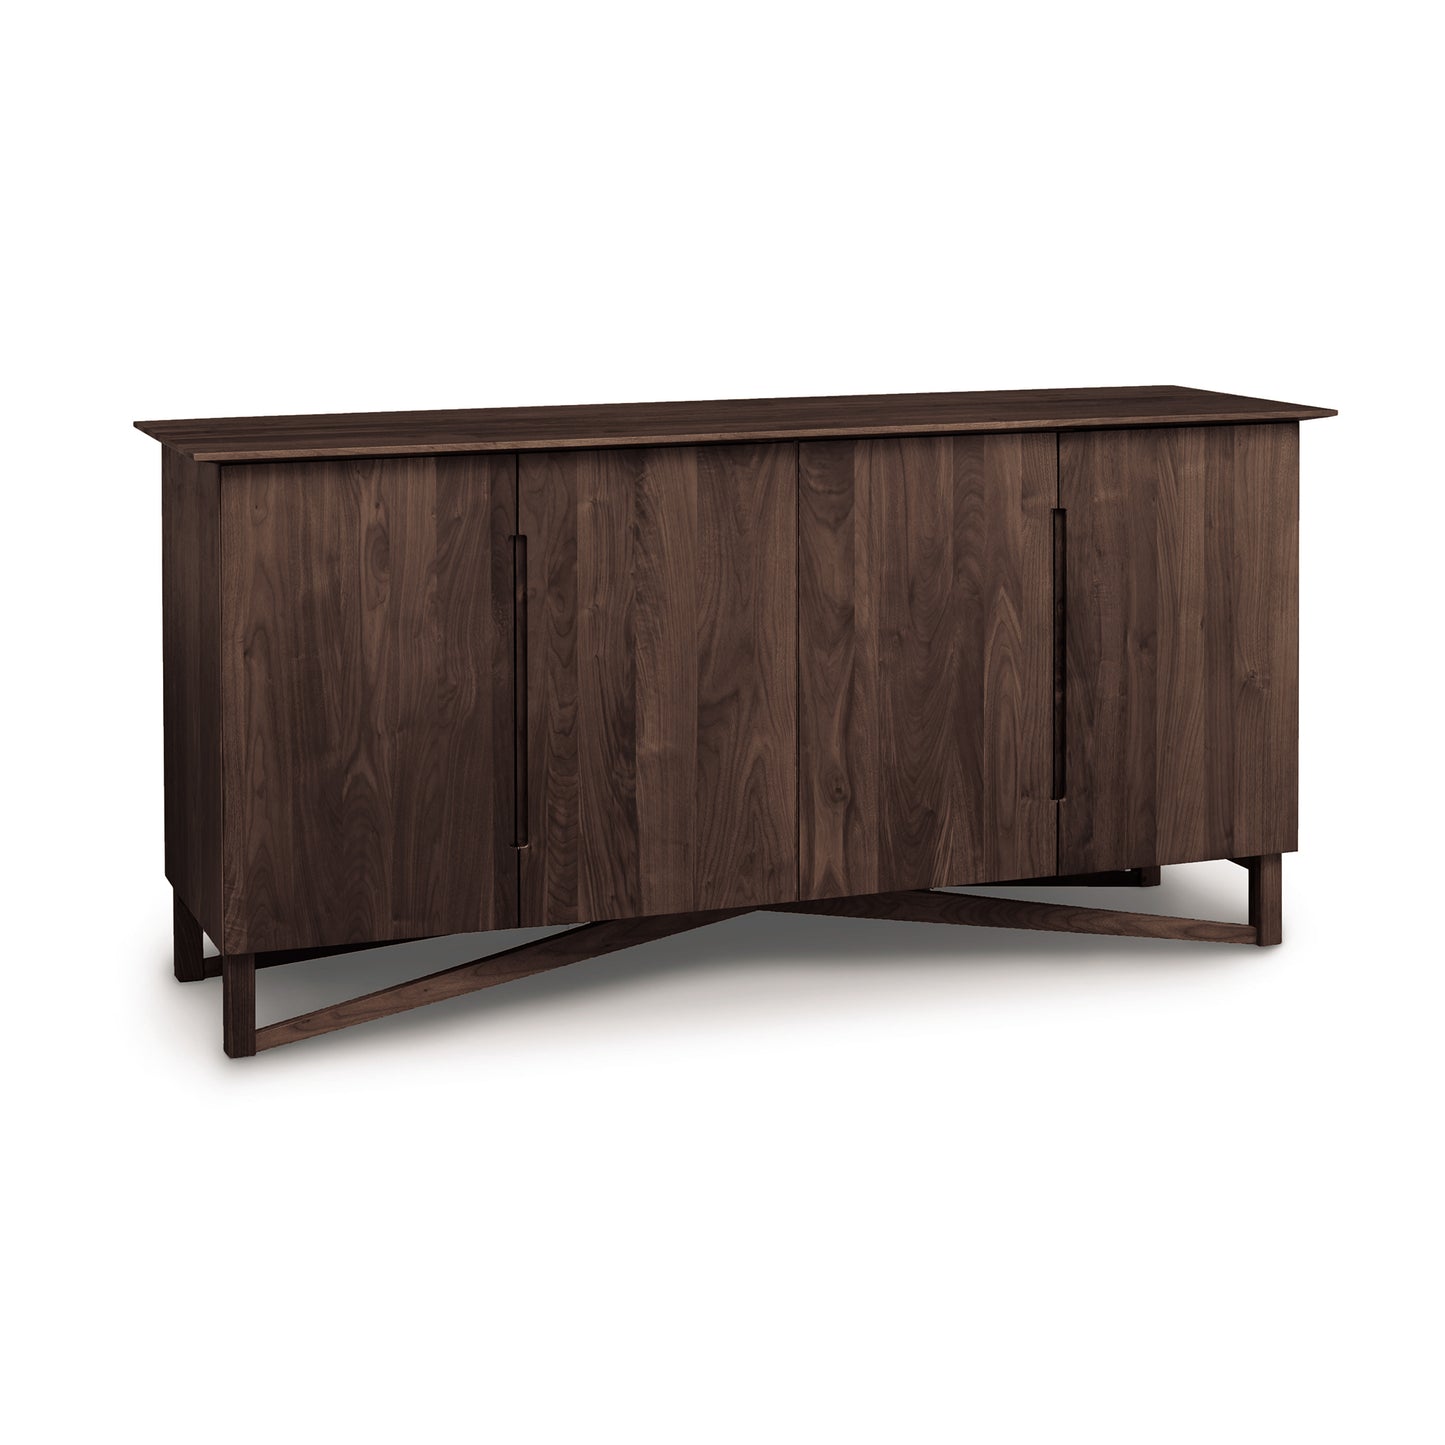 An Copeland Furniture Exeter Buffet, crafted from solid natural hardwood with multiple doors and a flat top, isolated on a white background.